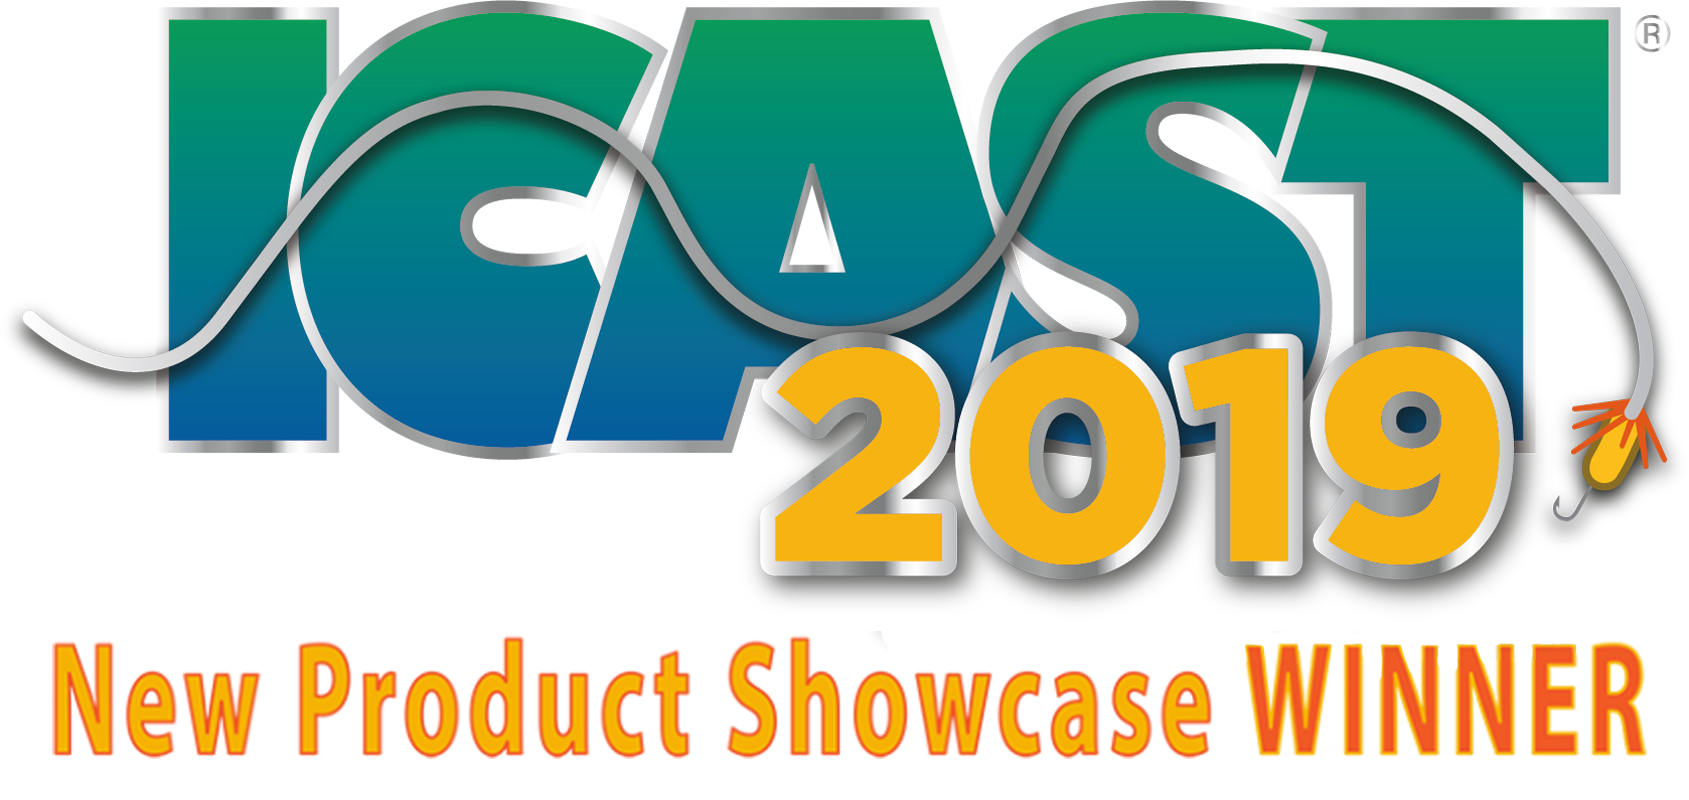 ICAST_2019_New_Product_Showcase_Winner.png?1546